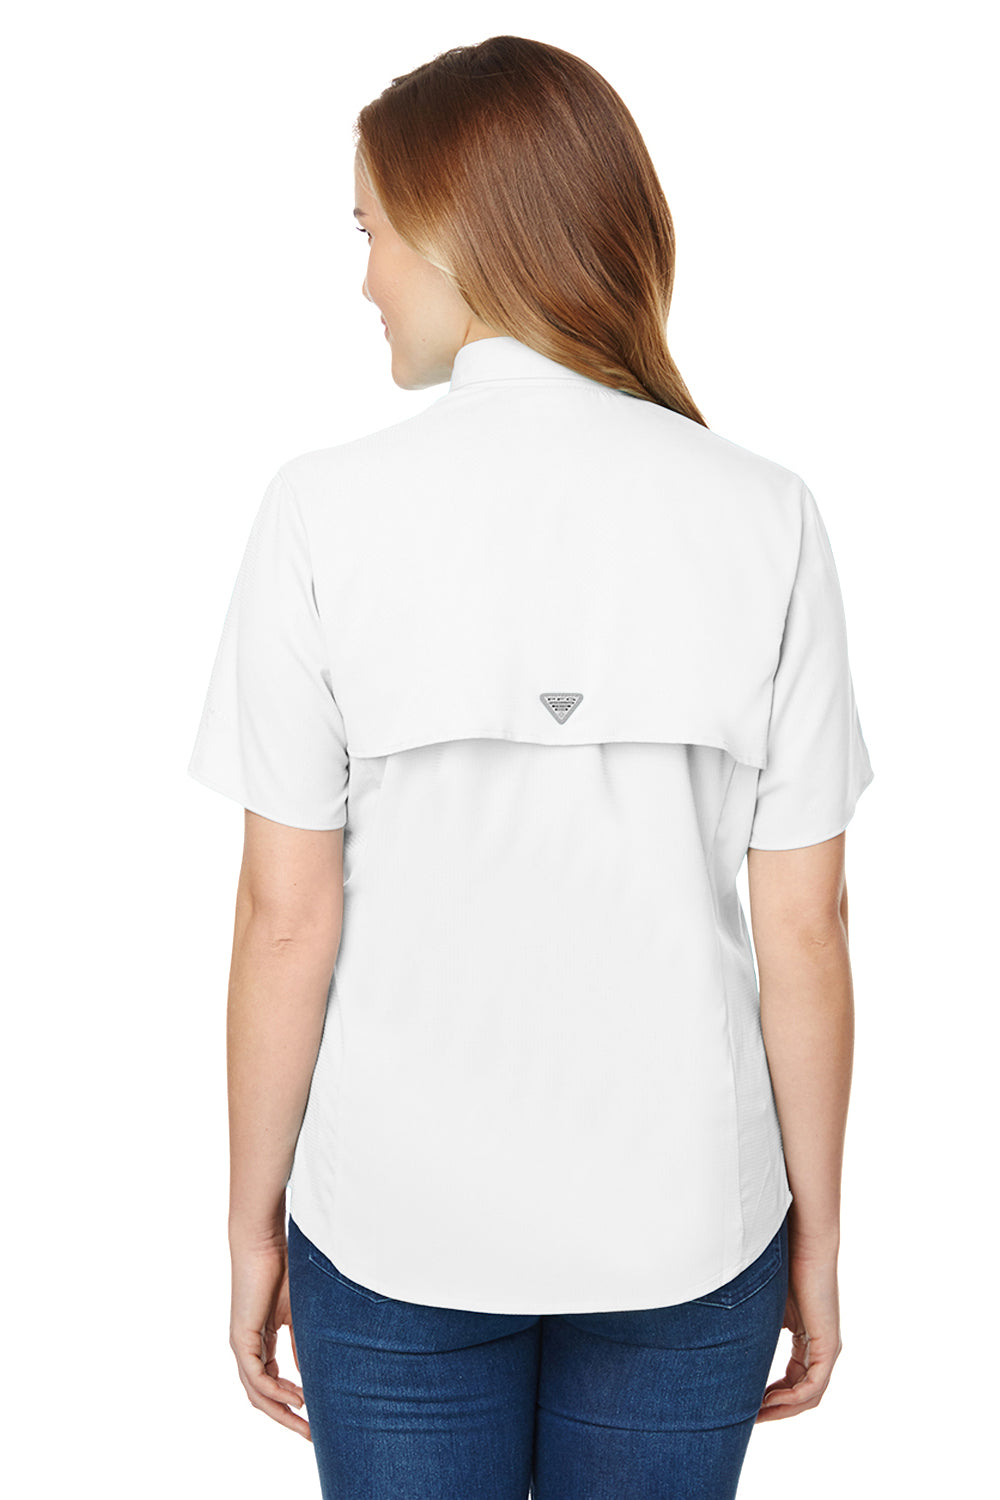 Columbia 7277 Womens Tamiami II Moisture Wicking Short Sleeve Button Down Shirt w/ Double Pockets White Back